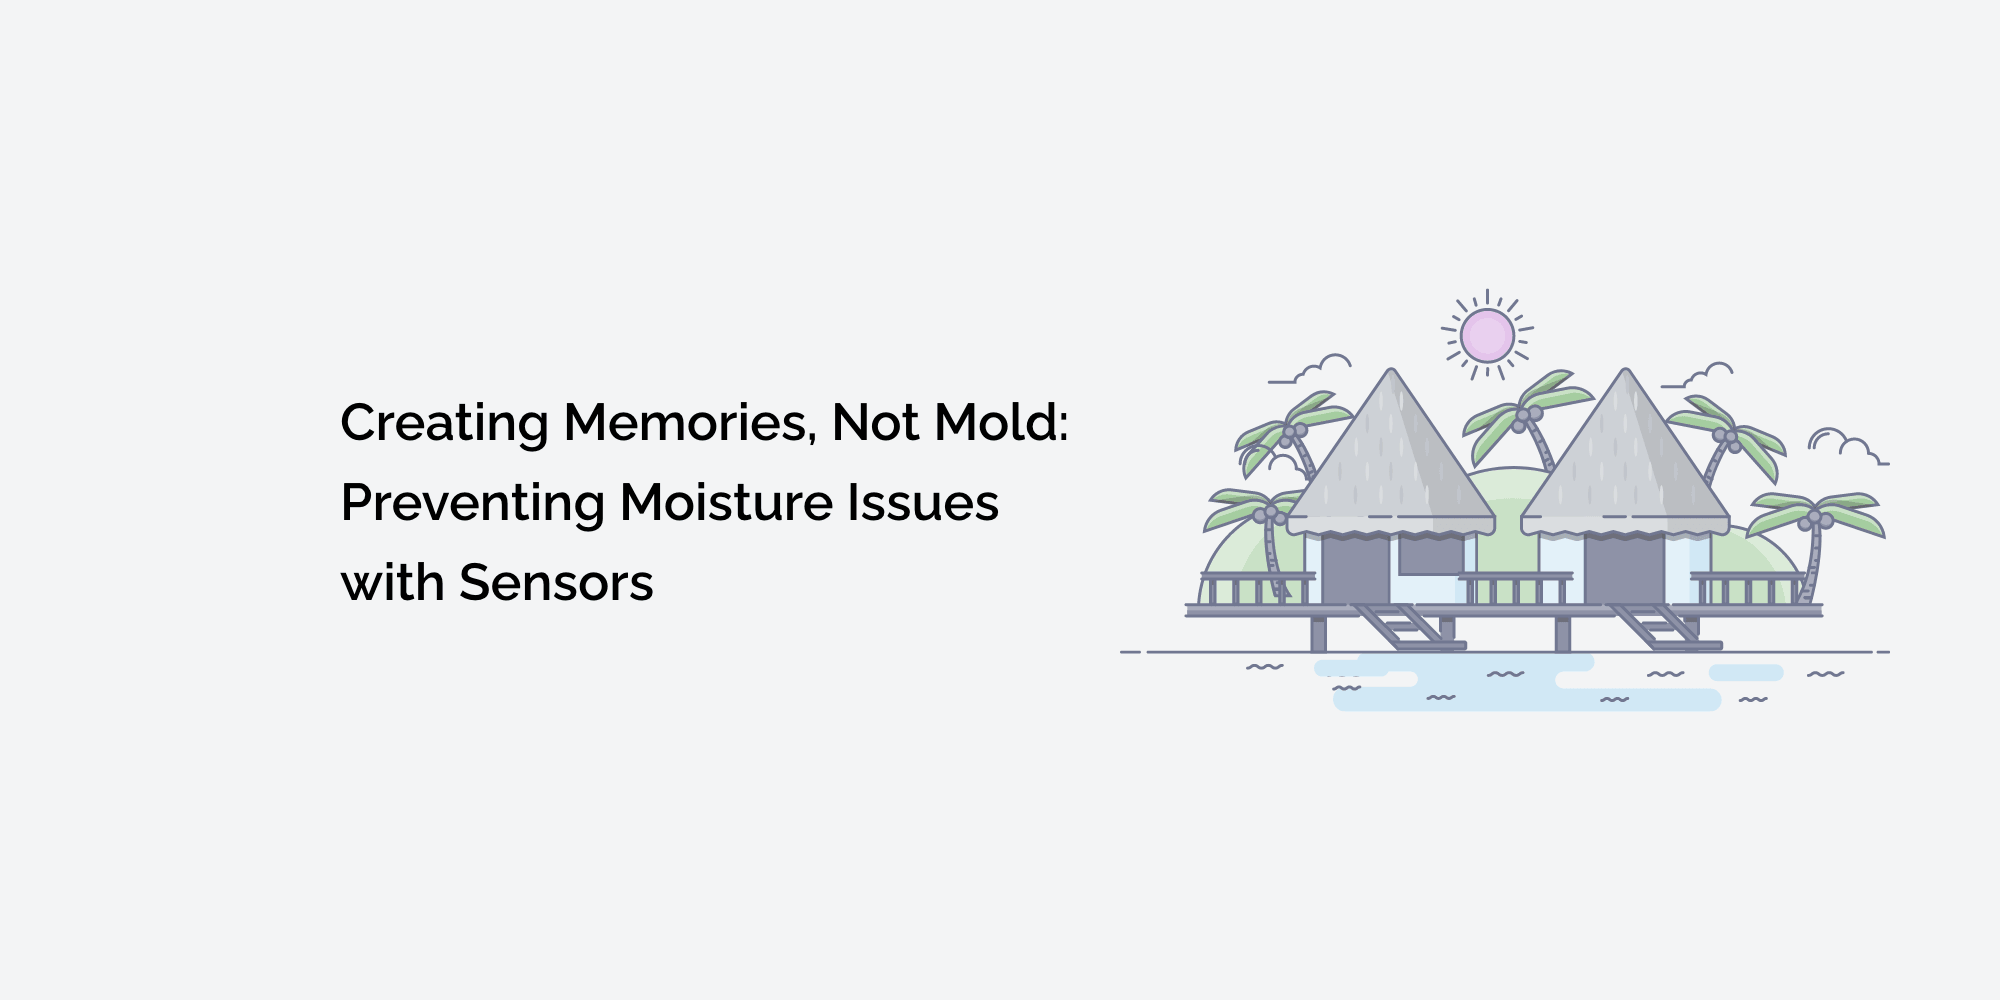 Creating Memories, Not Mold: Preventing Moisture Issues with Sensors